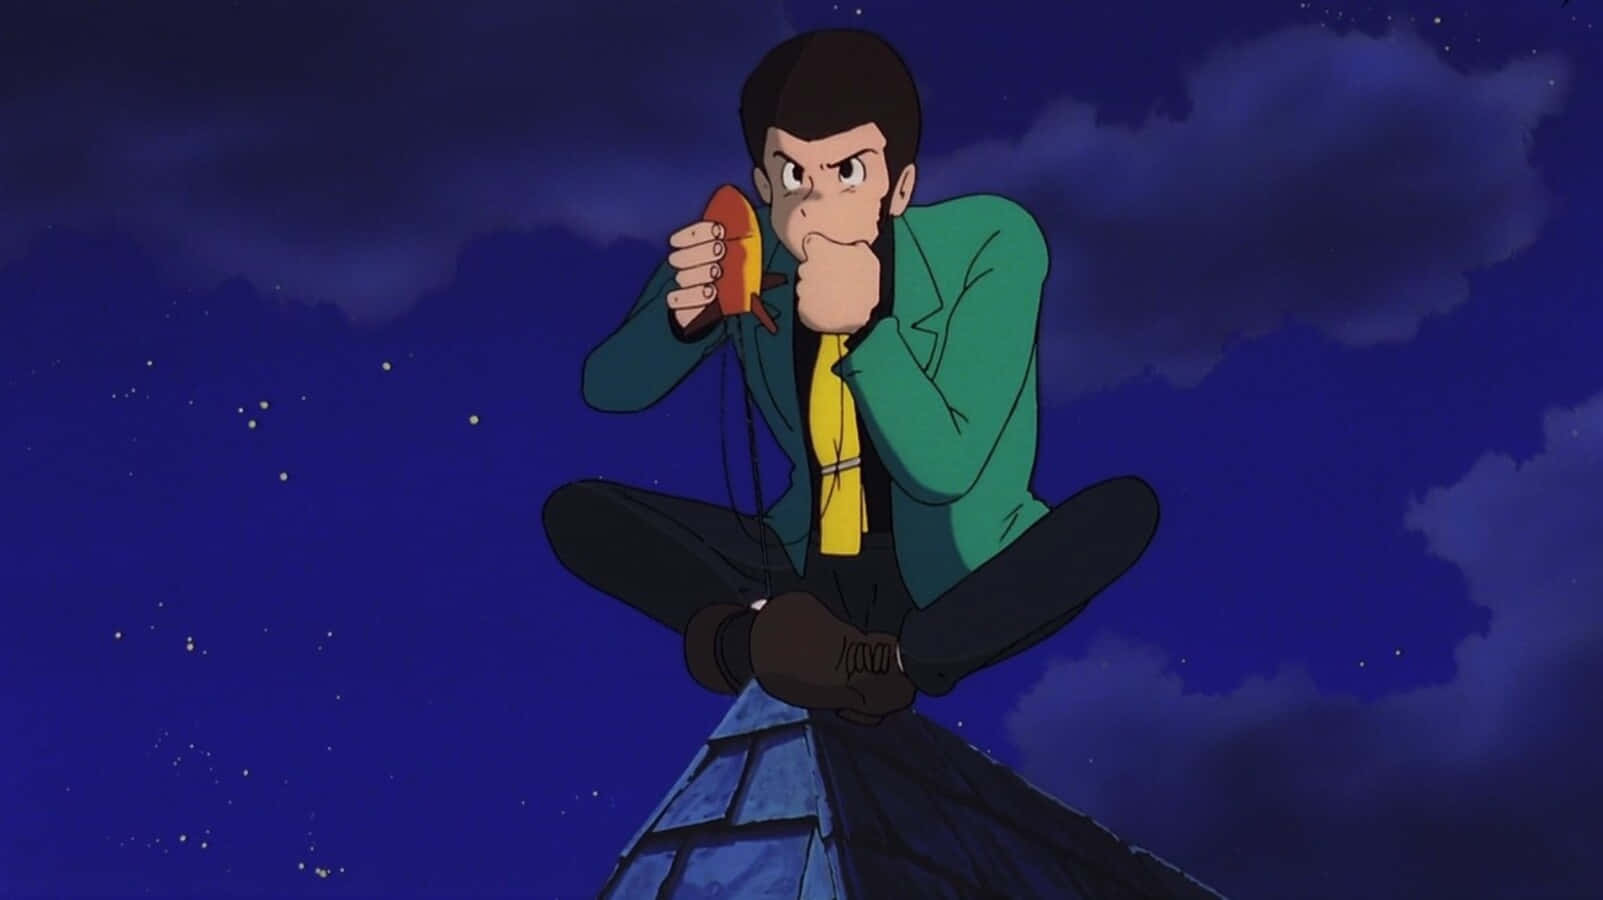 Lupin III and friends in action at The Castle of Cagliostro Wallpaper